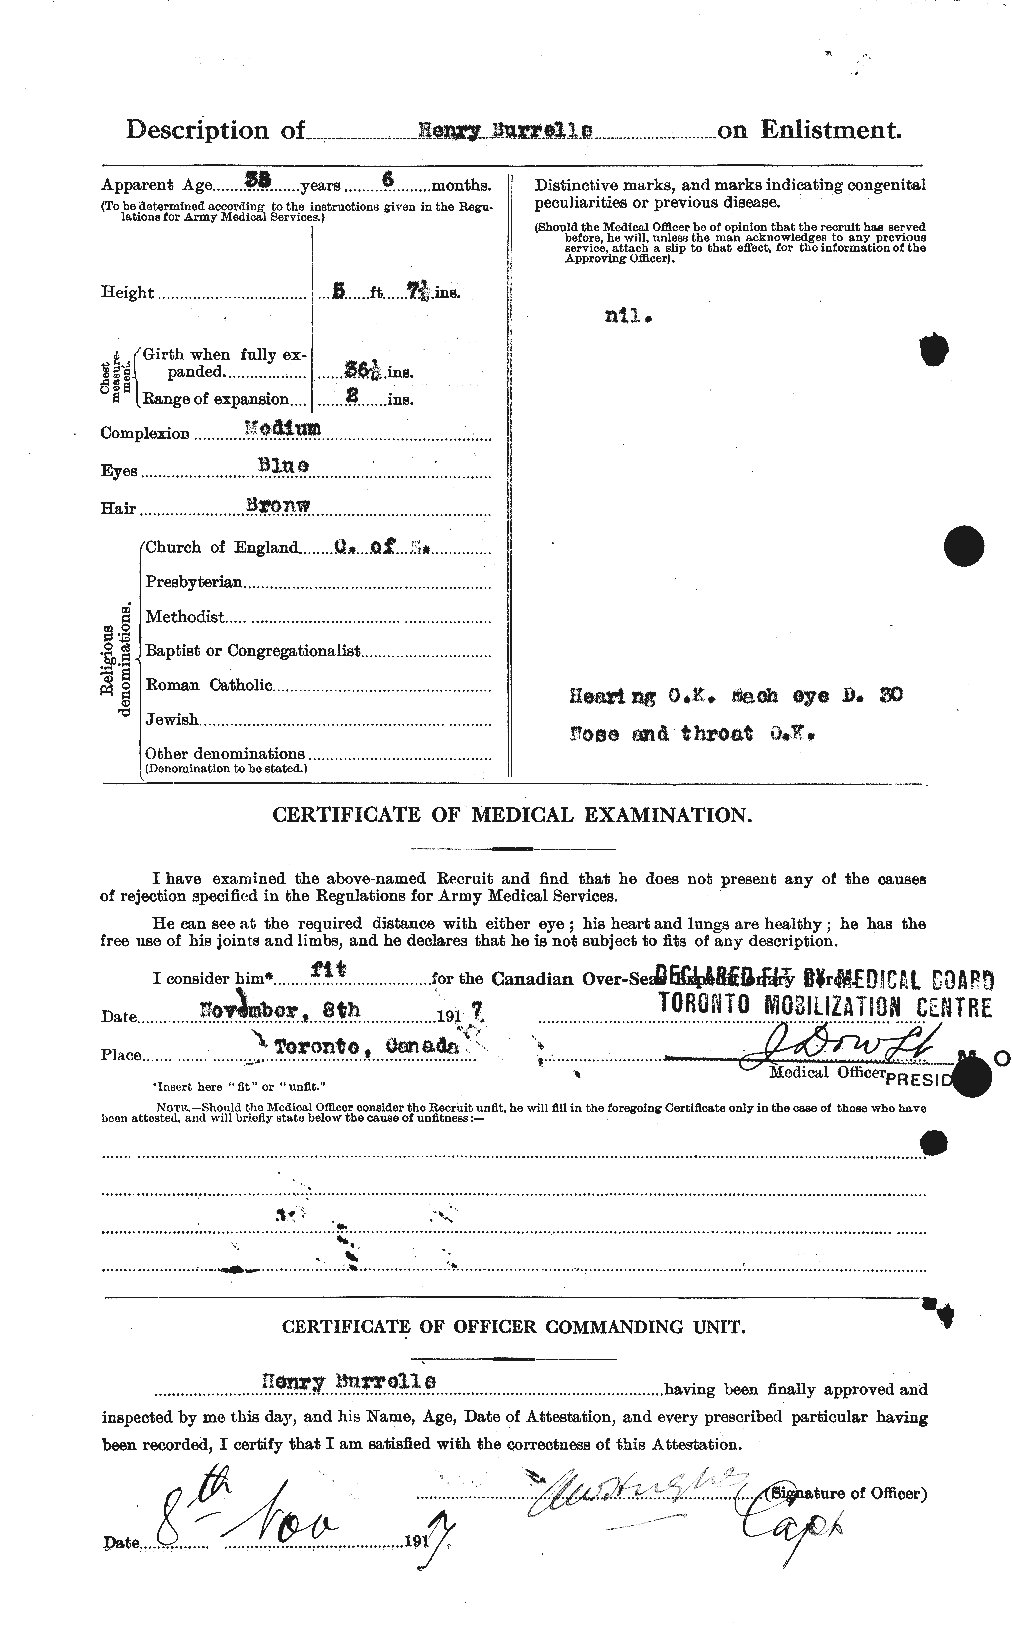 Personnel Records of the First World War - CEF 273978b